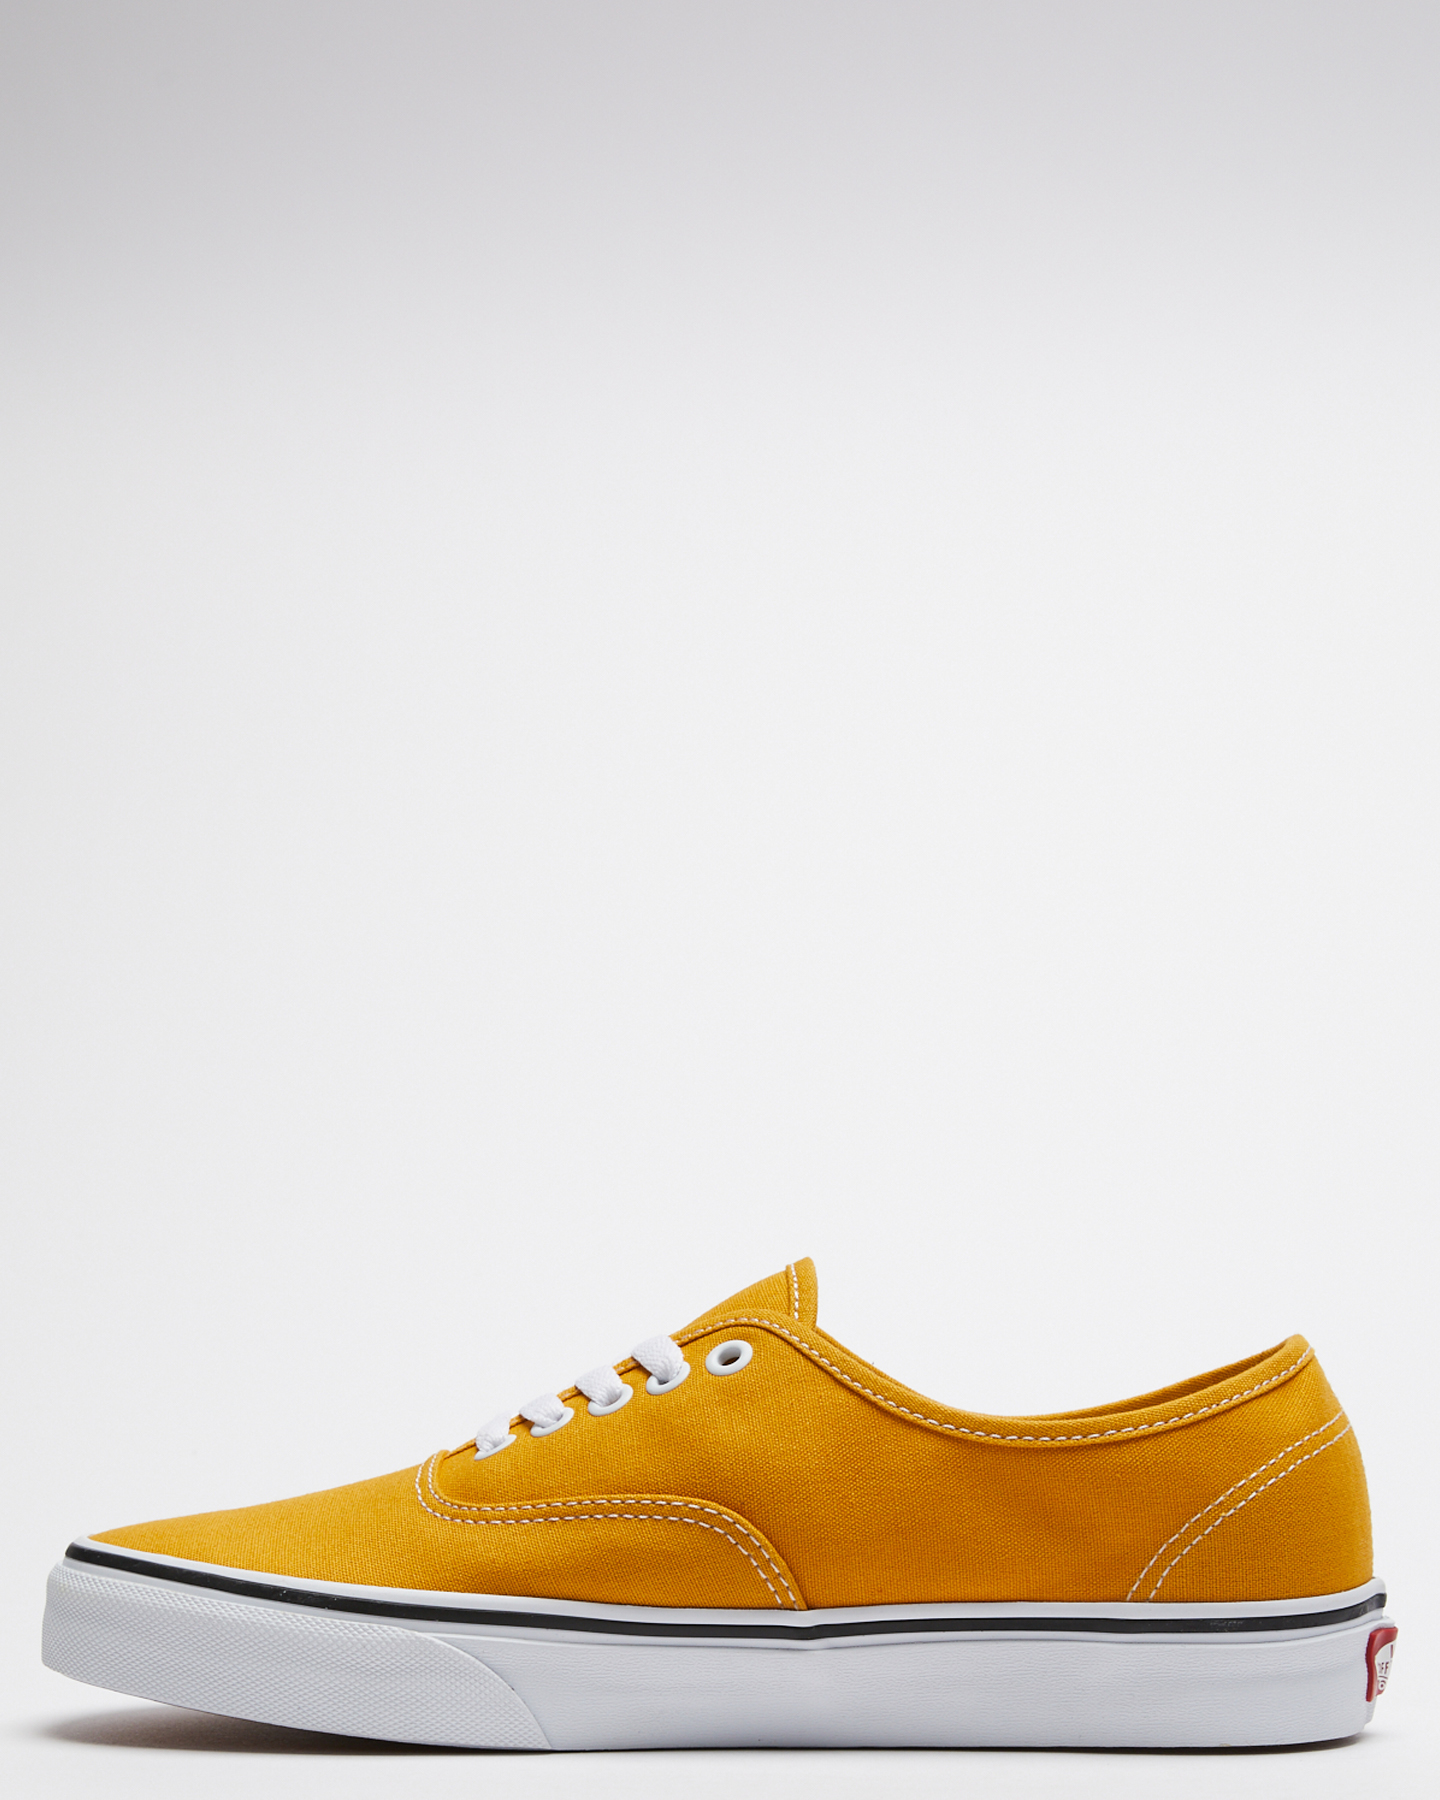 Vans Authentic Color Theory Shoe - Golden Yellow | SurfStitch